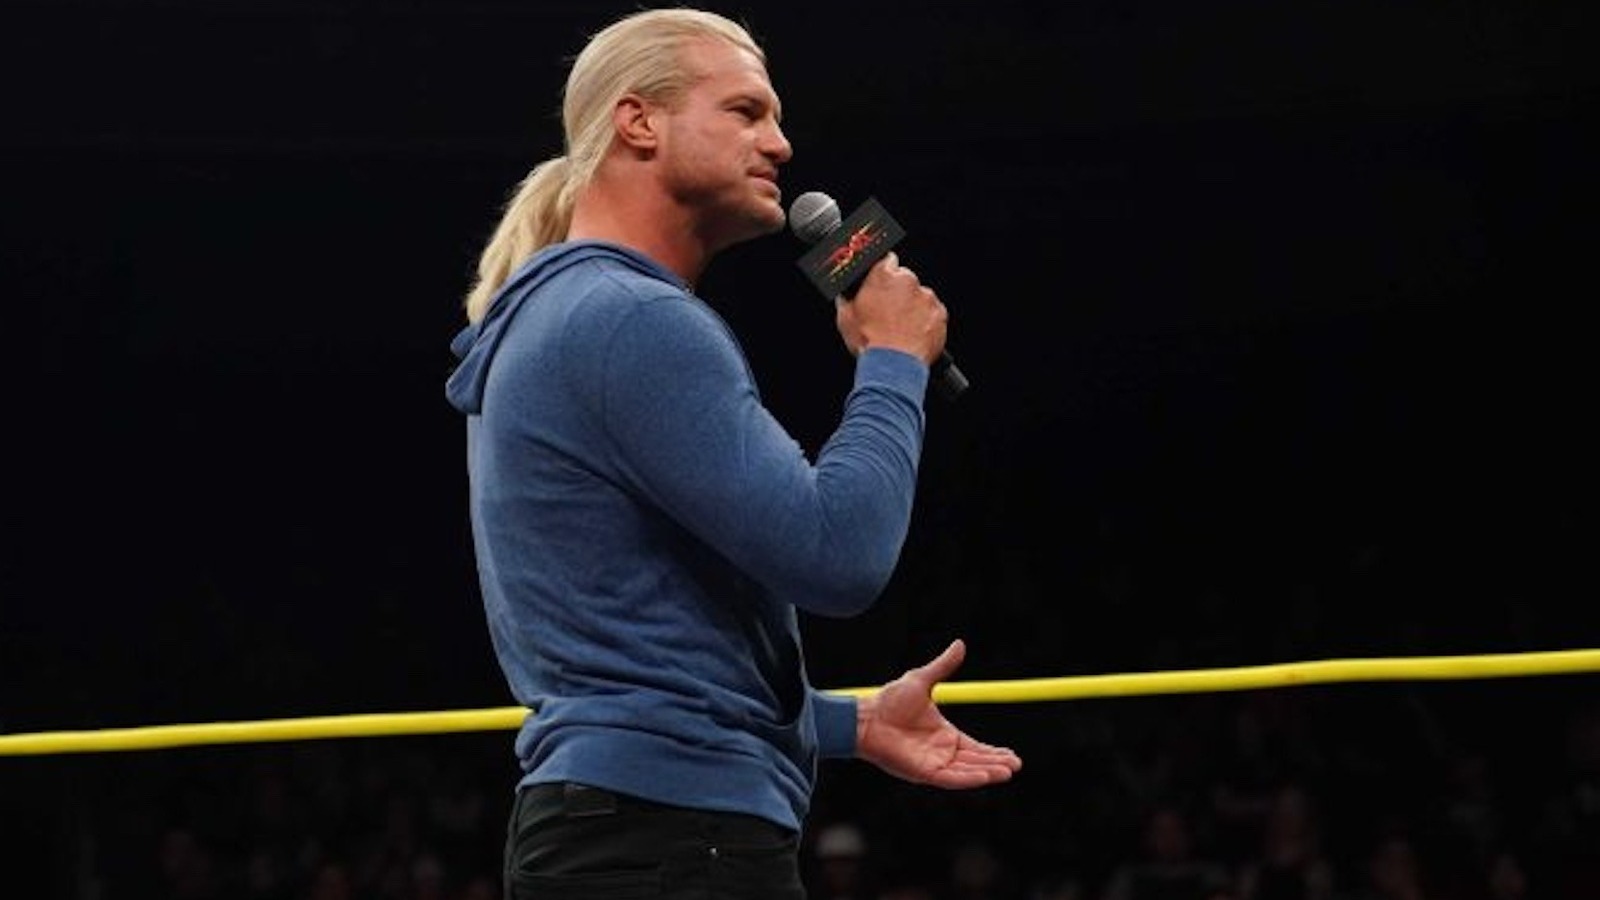 Former WWE Star Dolph Ziggler Explains Why Netflix Streaming Deal Is Not A 'Demotion'